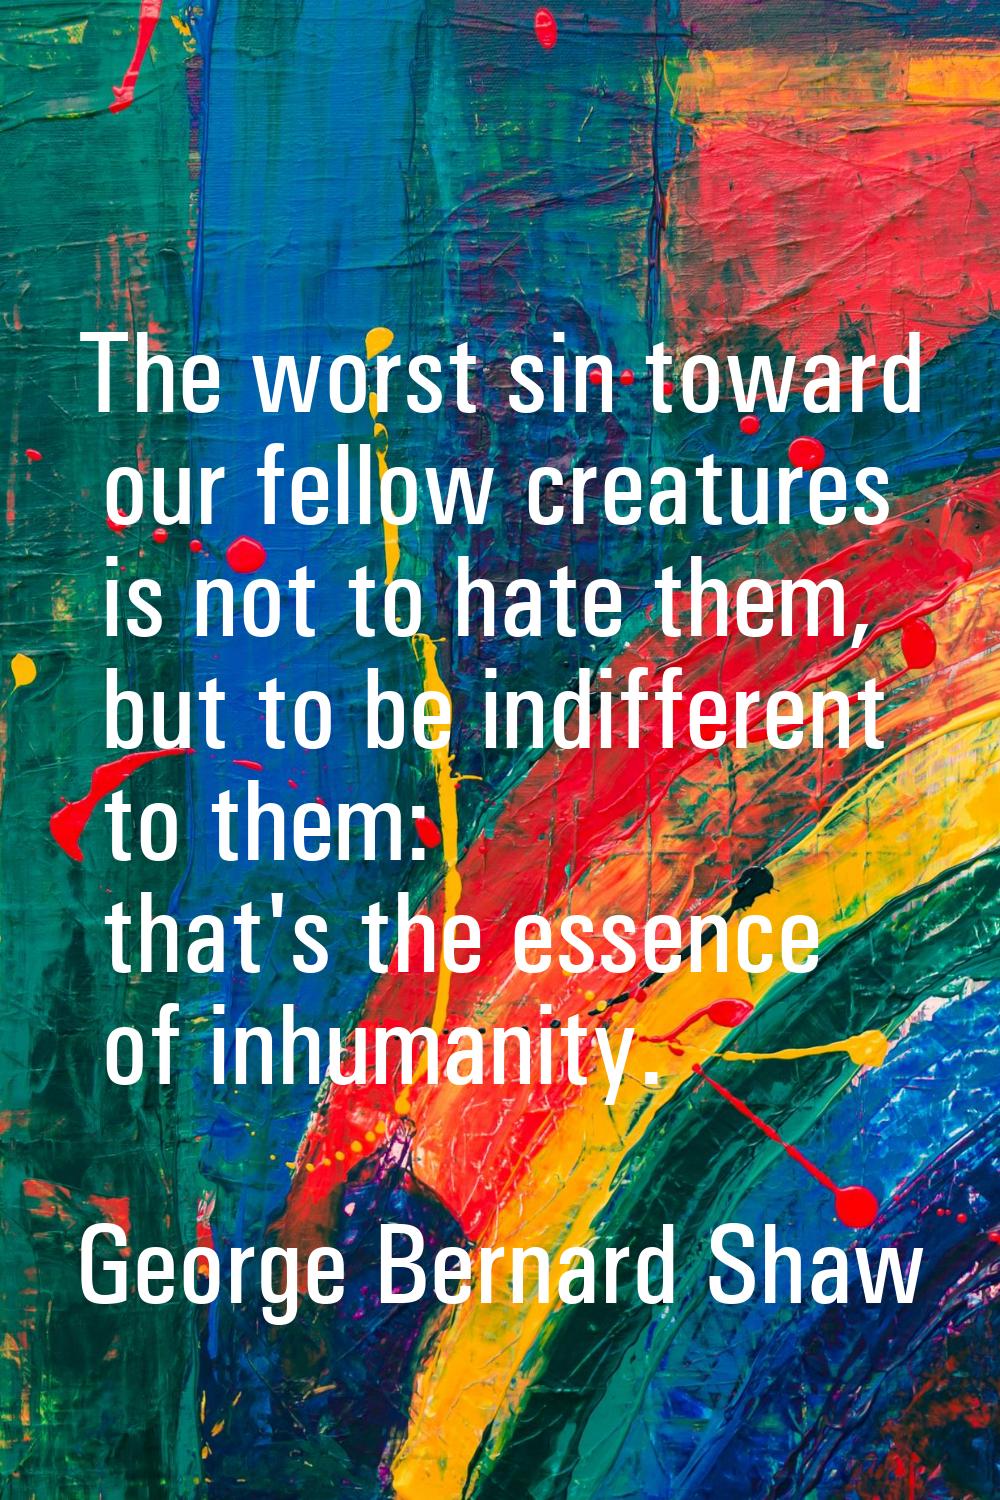 The worst sin toward our fellow creatures is not to hate them, but to be indifferent to them: that'